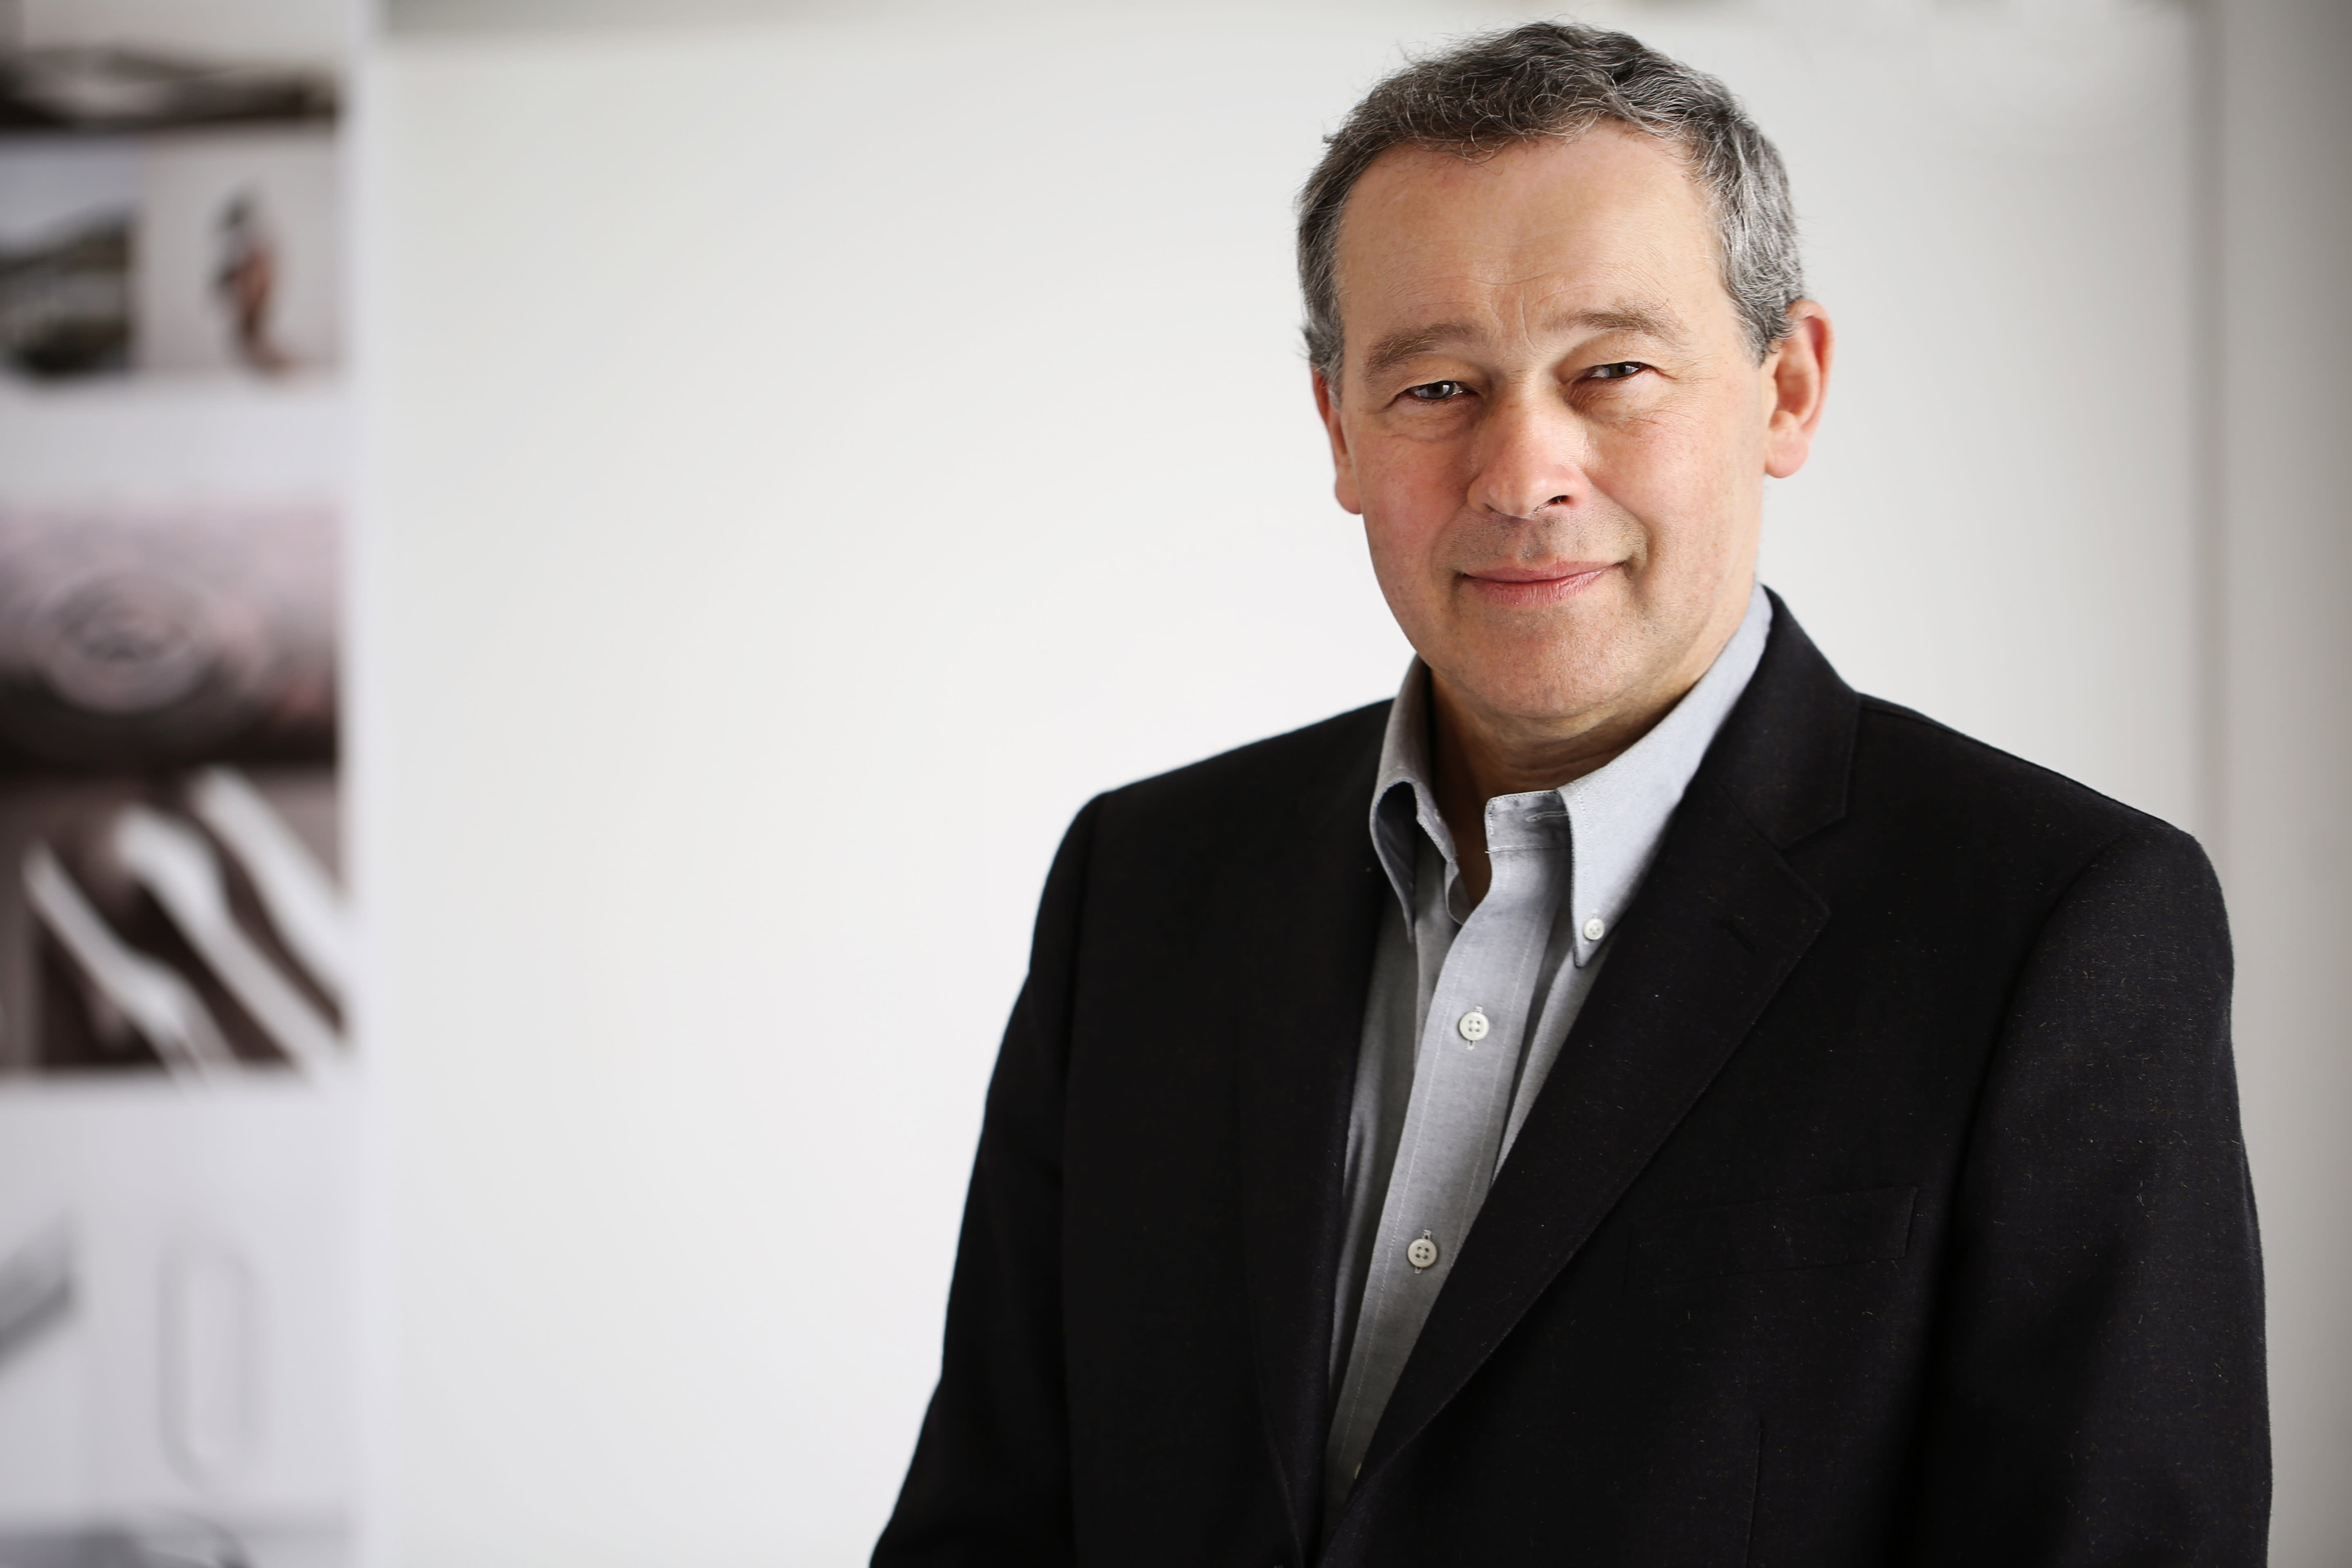 Peter Rawlinson, CEO of Lucid Motors, on his SPAC deal and the making of Lucid Air